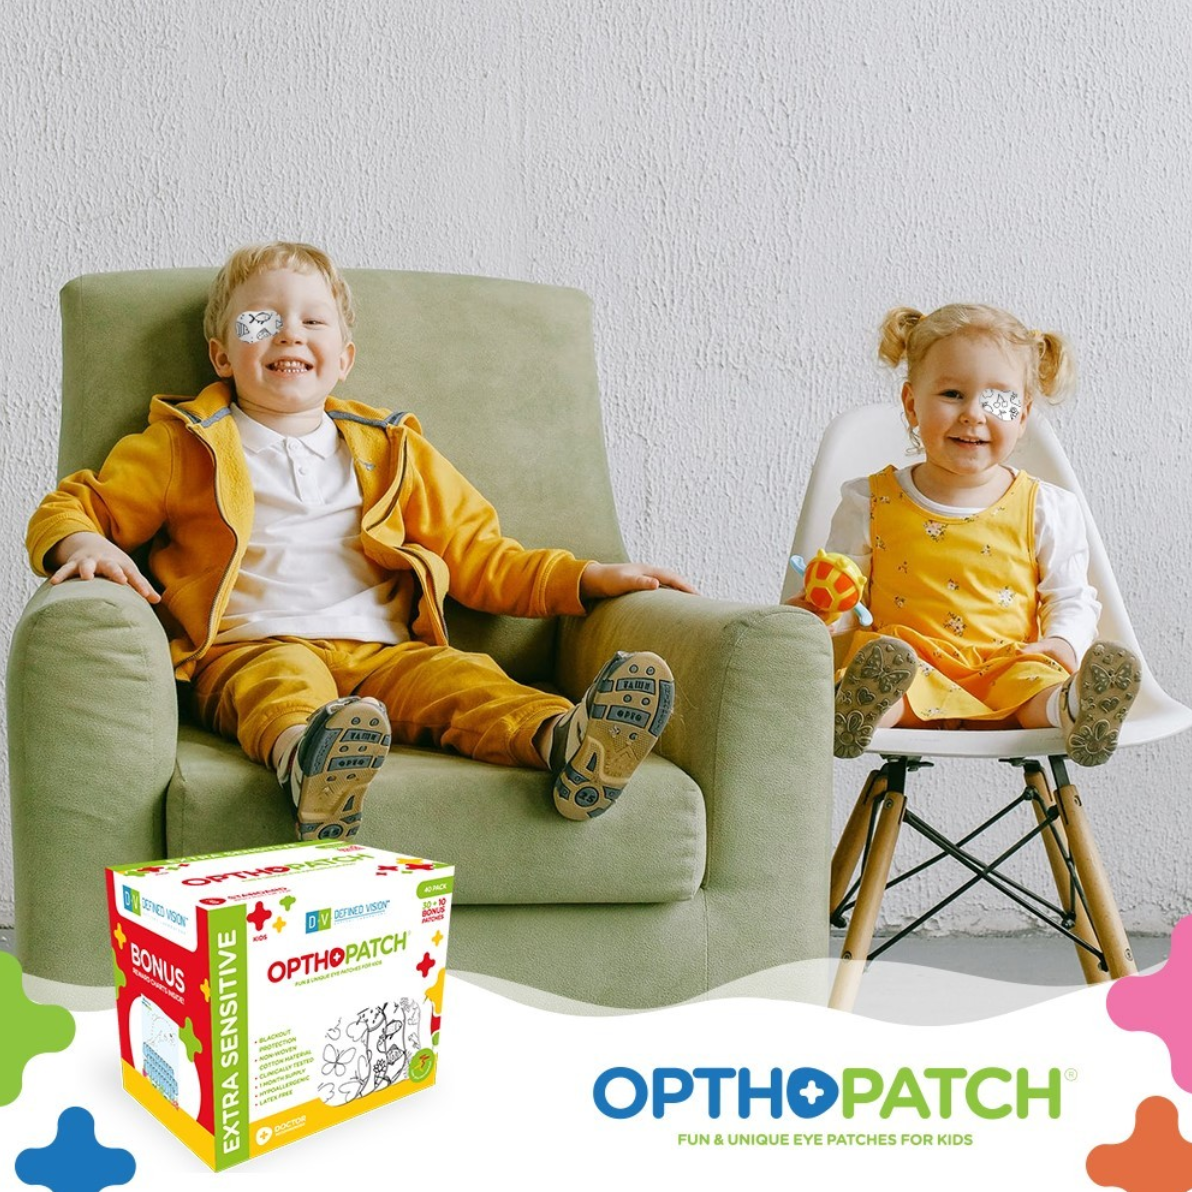 Opthopatch eye patches